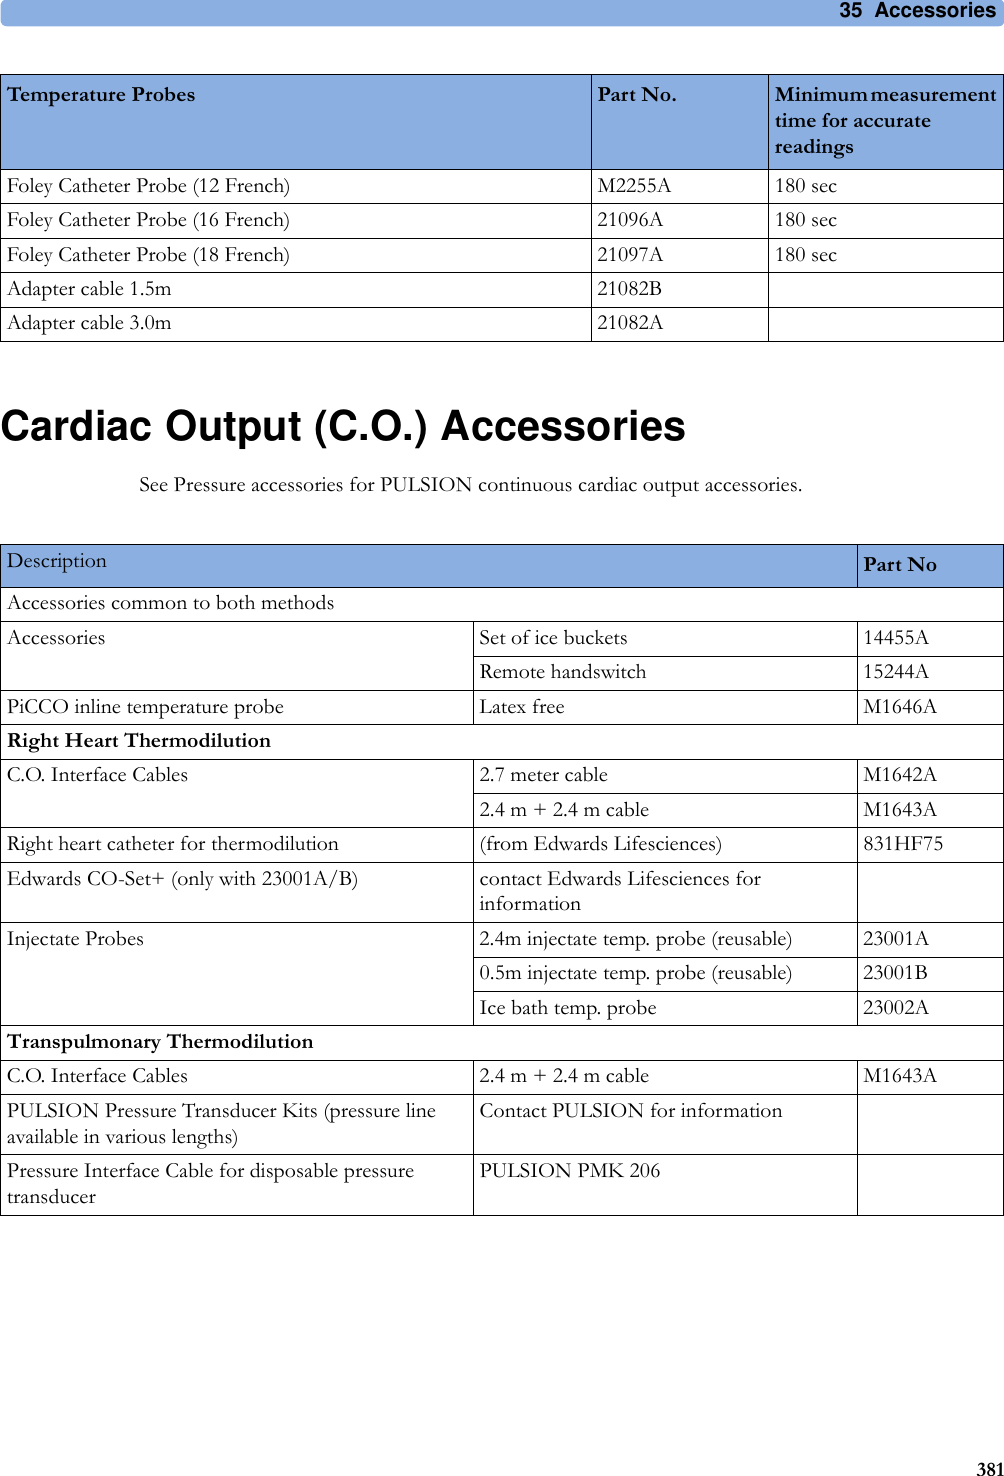 35 Accessories381Cardiac Output (C.O.) AccessoriesSee Pressure accessories for PULSION continuous cardiac output accessories.Foley Catheter Probe (12 French) M2255A 180 secFoley Catheter Probe (16 French) 21096A 180 secFoley Catheter Probe (18 French) 21097A 180 secAdapter cable 1.5m 21082BAdapter cable 3.0m 21082ATemperature Probes Part No. Minimum measurement time for accurate readingsDescription Part NoAccessories common to both methodsAccessories Set of ice buckets 14455ARemote handswitch 15244APiCCO inline temperature probe Latex free M1646ARight Heart ThermodilutionC.O. Interface Cables 2.7 meter cable M1642A2.4 m + 2.4 m cable M1643ARight heart catheter for thermodilution (from Edwards Lifesciences) 831HF75Edwards CO-Set+ (only with 23001A/B) contact Edwards Lifesciences for informationInjectate Probes 2.4m injectate temp. probe (reusable) 23001A0.5m injectate temp. probe (reusable) 23001BIce bath temp. probe 23002ATranspulmonary ThermodilutionC.O. Interface Cables 2.4 m + 2.4 m cable M1643APULSION Pressure Transducer Kits (pressure line available in various lengths)Contact PULSION for informationPressure Interface Cable for disposable pressure transducerPULSION PMK 206